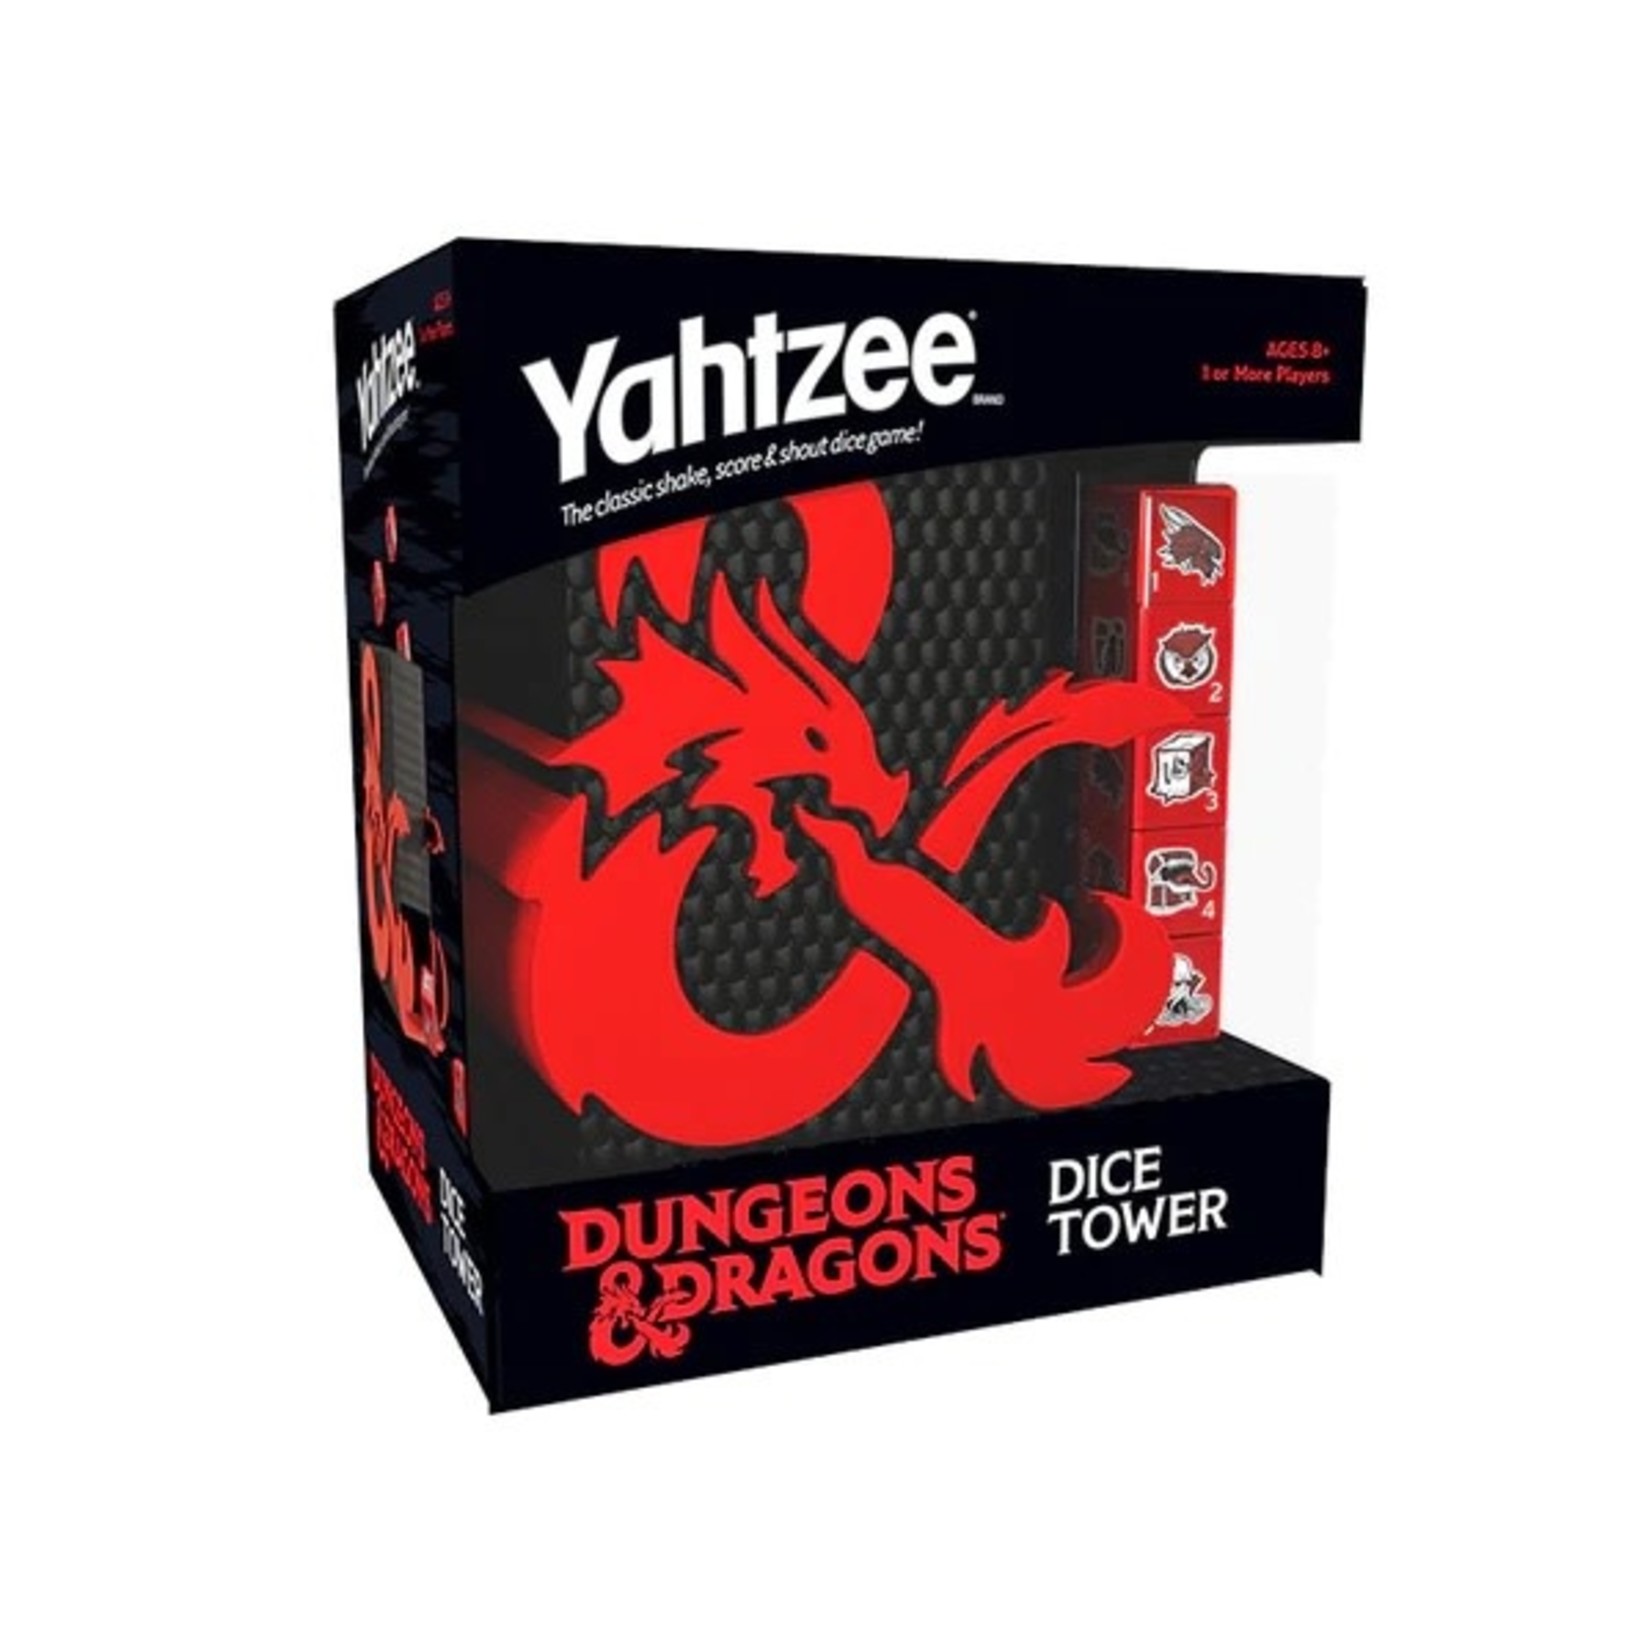 USAopoly Yahtzee Dungeons & Dragons